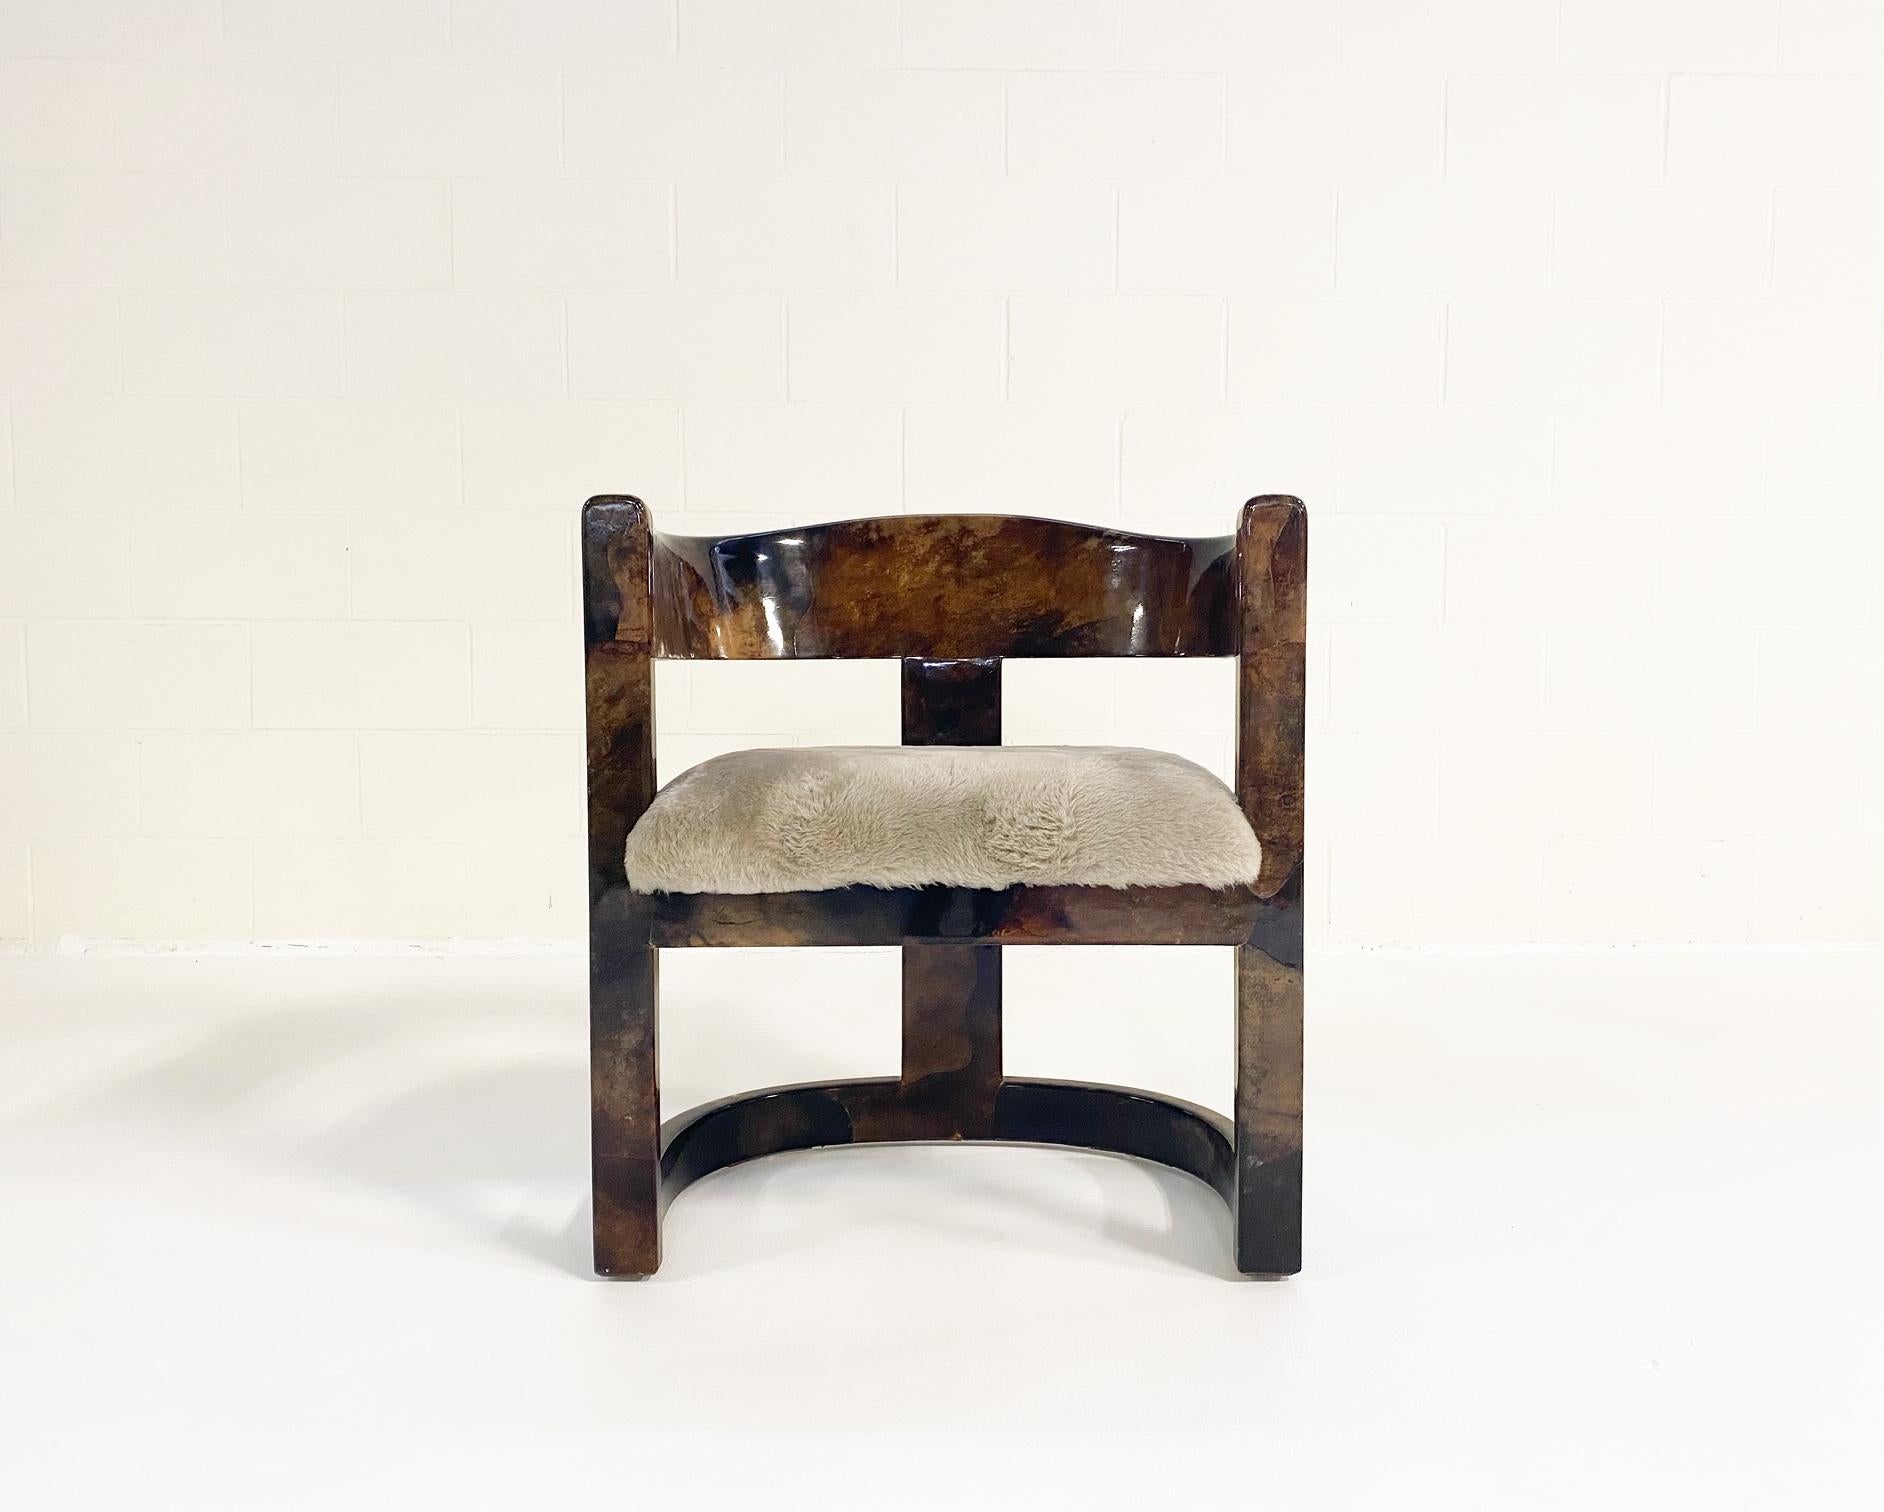 Karl Springer's furniture wrapped in lacquered skins—goat, lizard, alligator, shagreen, python, and even frog—were his most distinct pieces. This beautiful Springer armchair is made of lacquered goatskin. The thick lacquer creates a very cool,